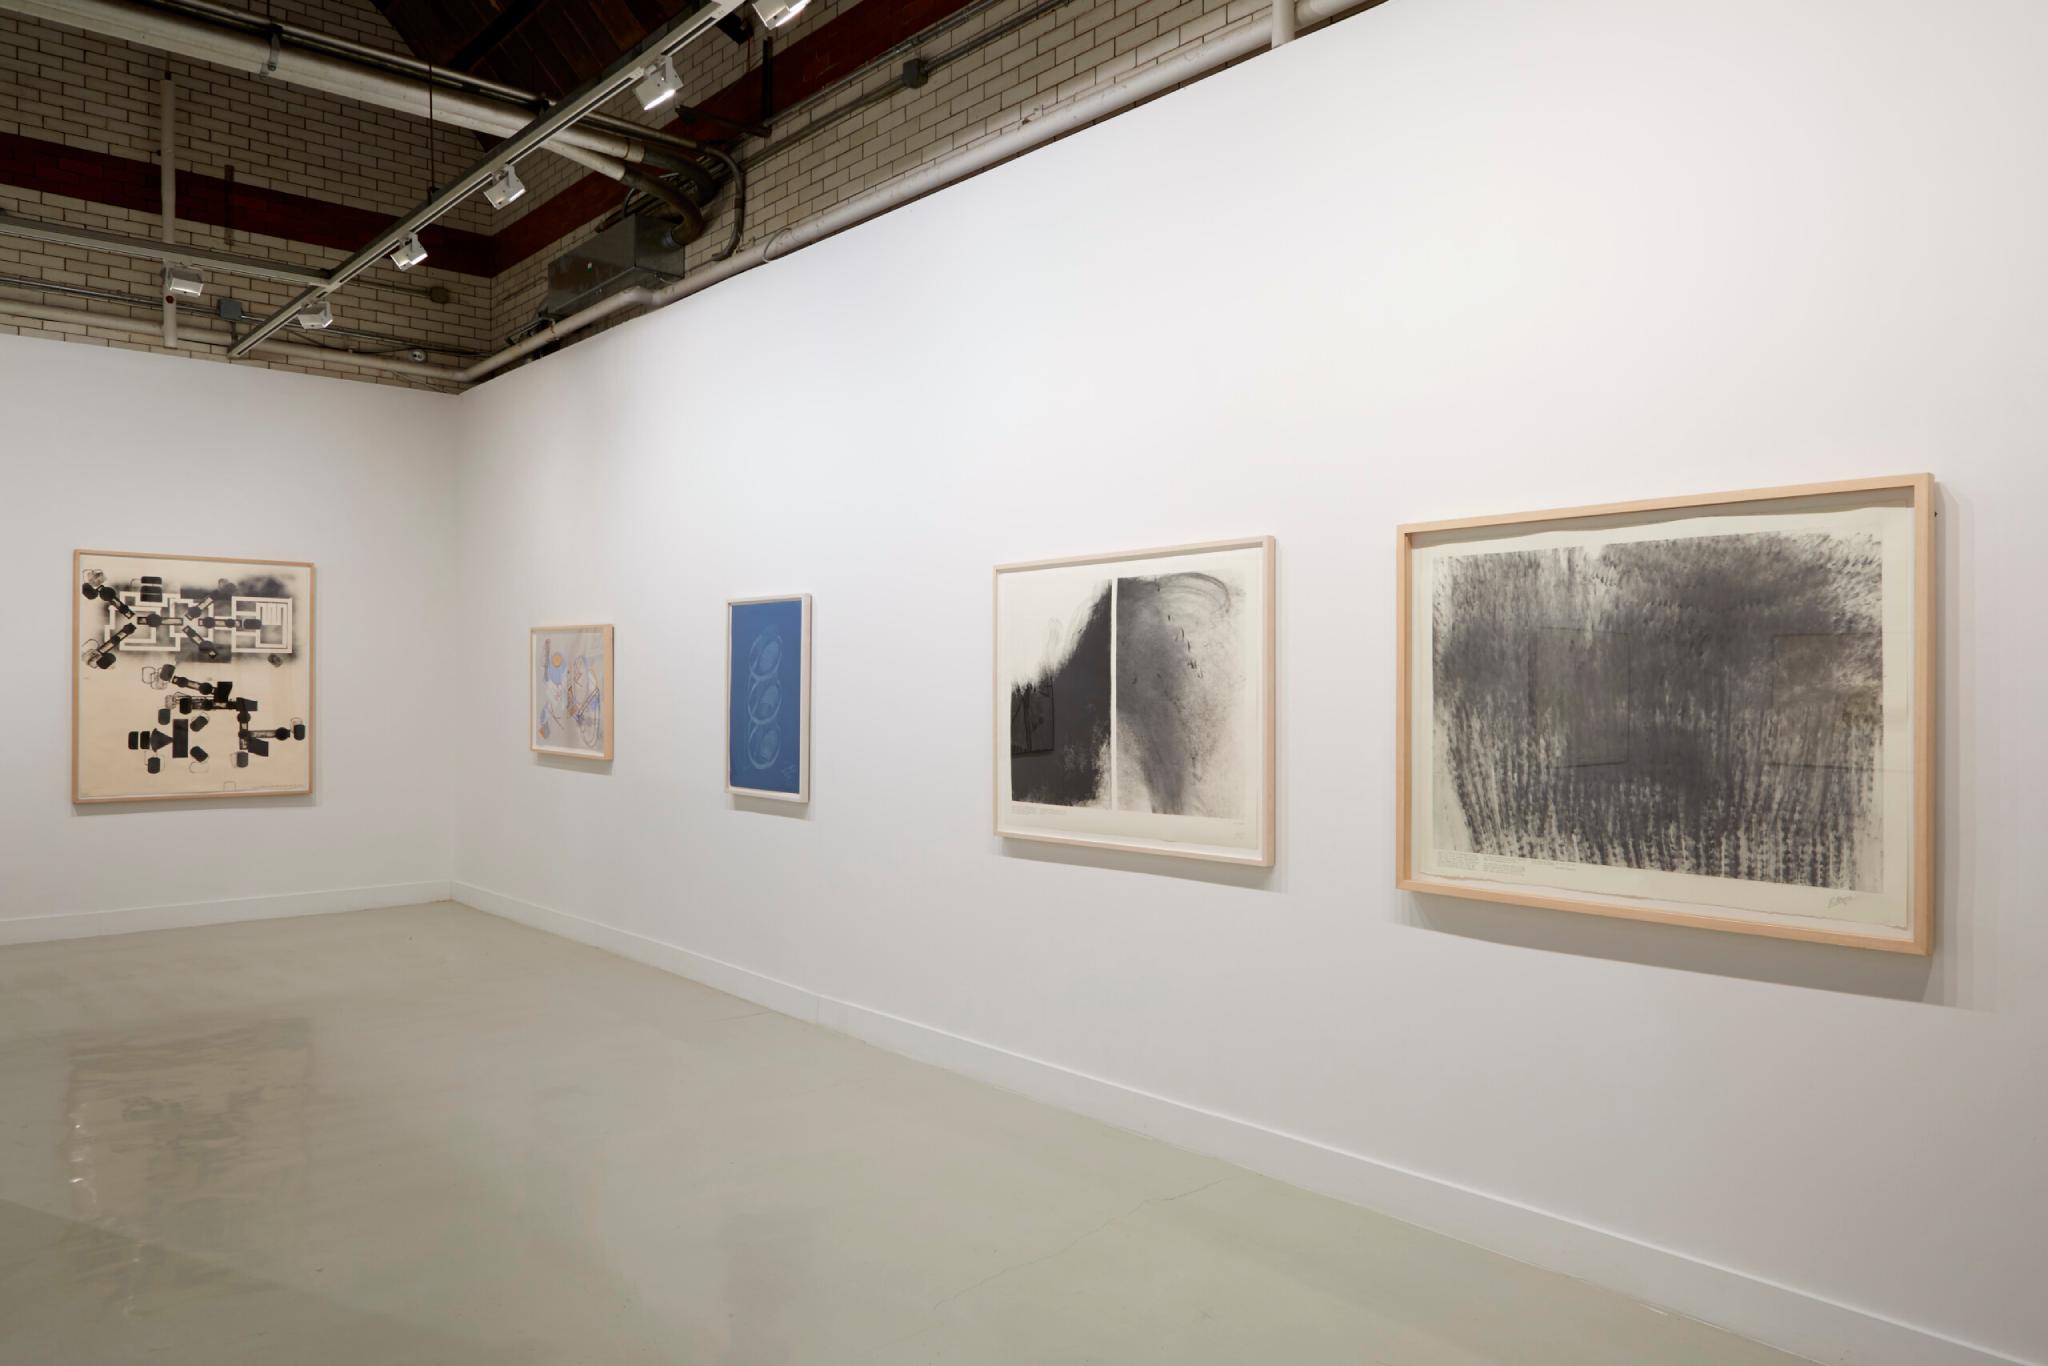 Installation view from "Coordinates: Drawings and Prints Marking Five Exhibitions at Beaver College (1977-84)" with 5 canvases with abstract monochrome pieces.